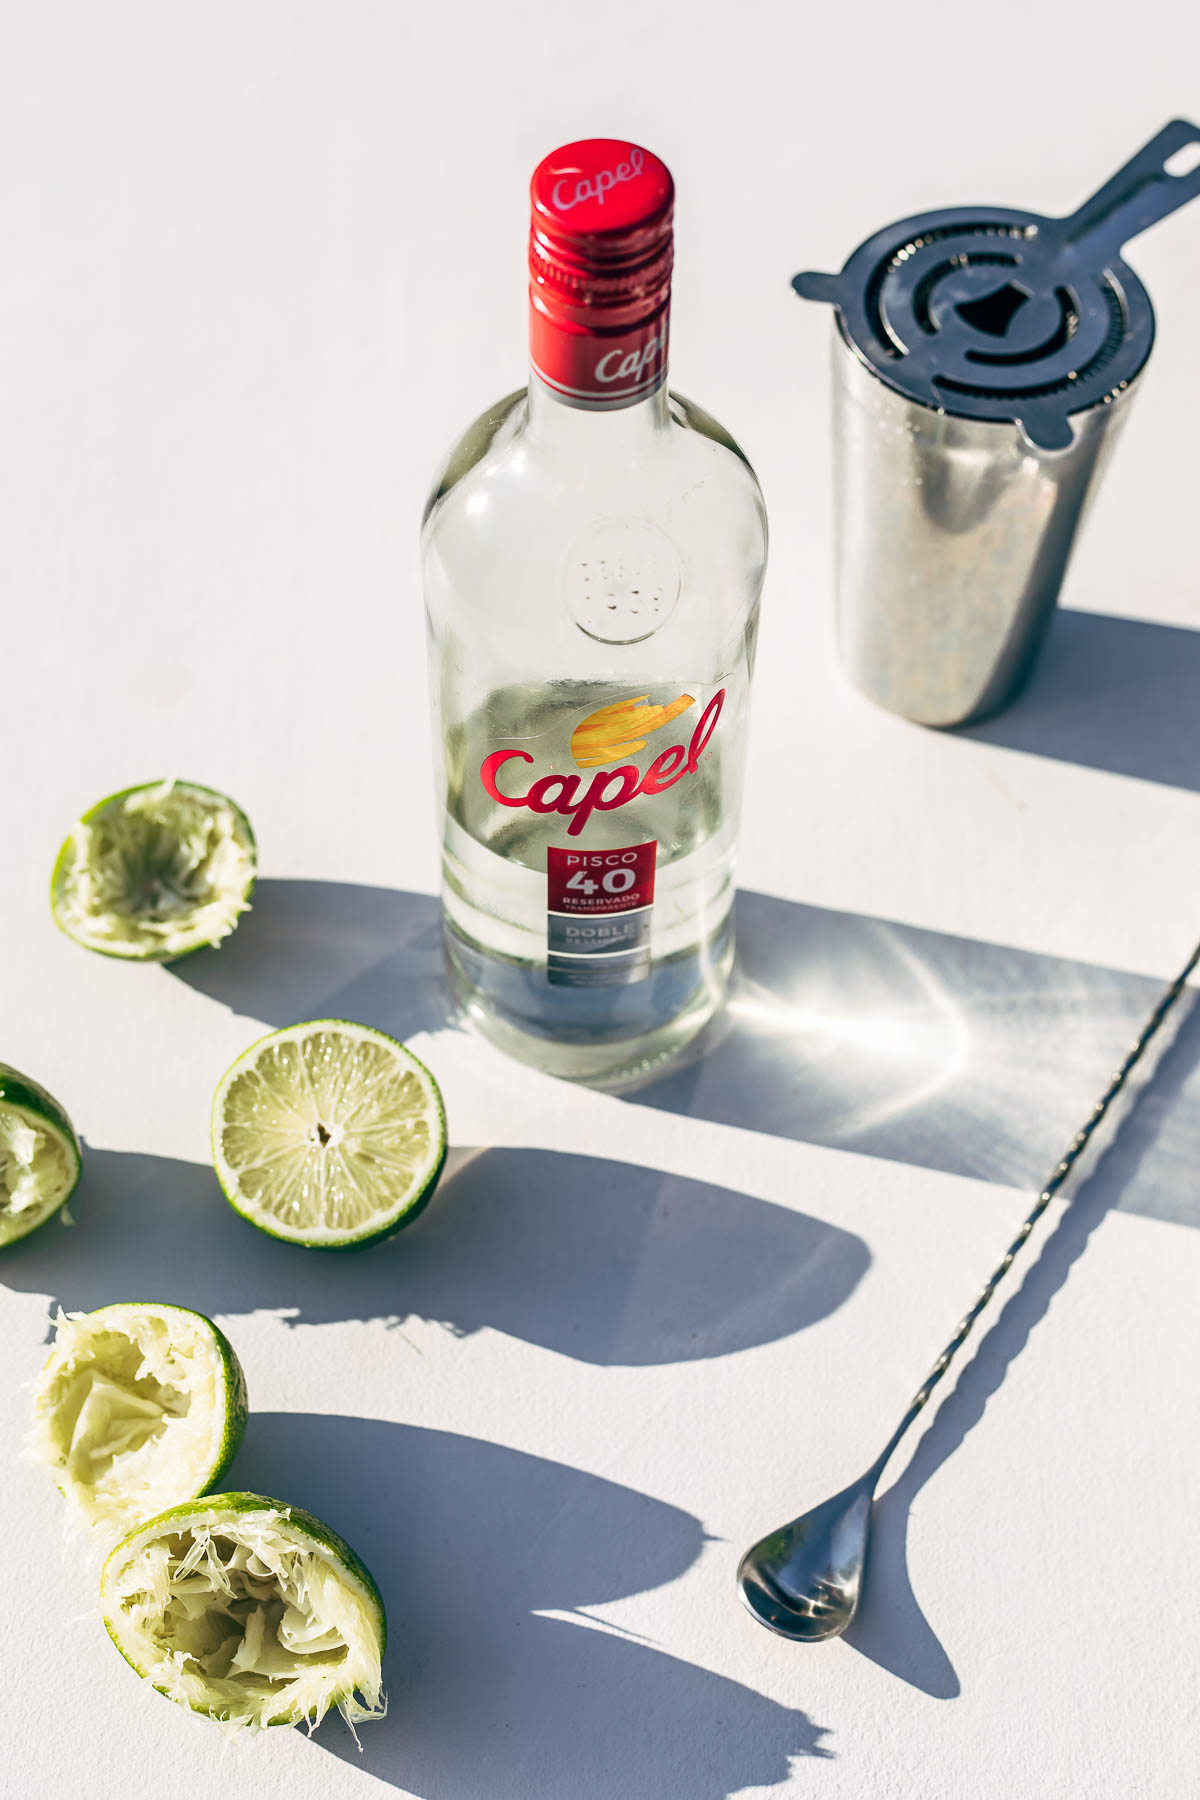 A bottle of Pisco on a white surface surrounded by cut limes.